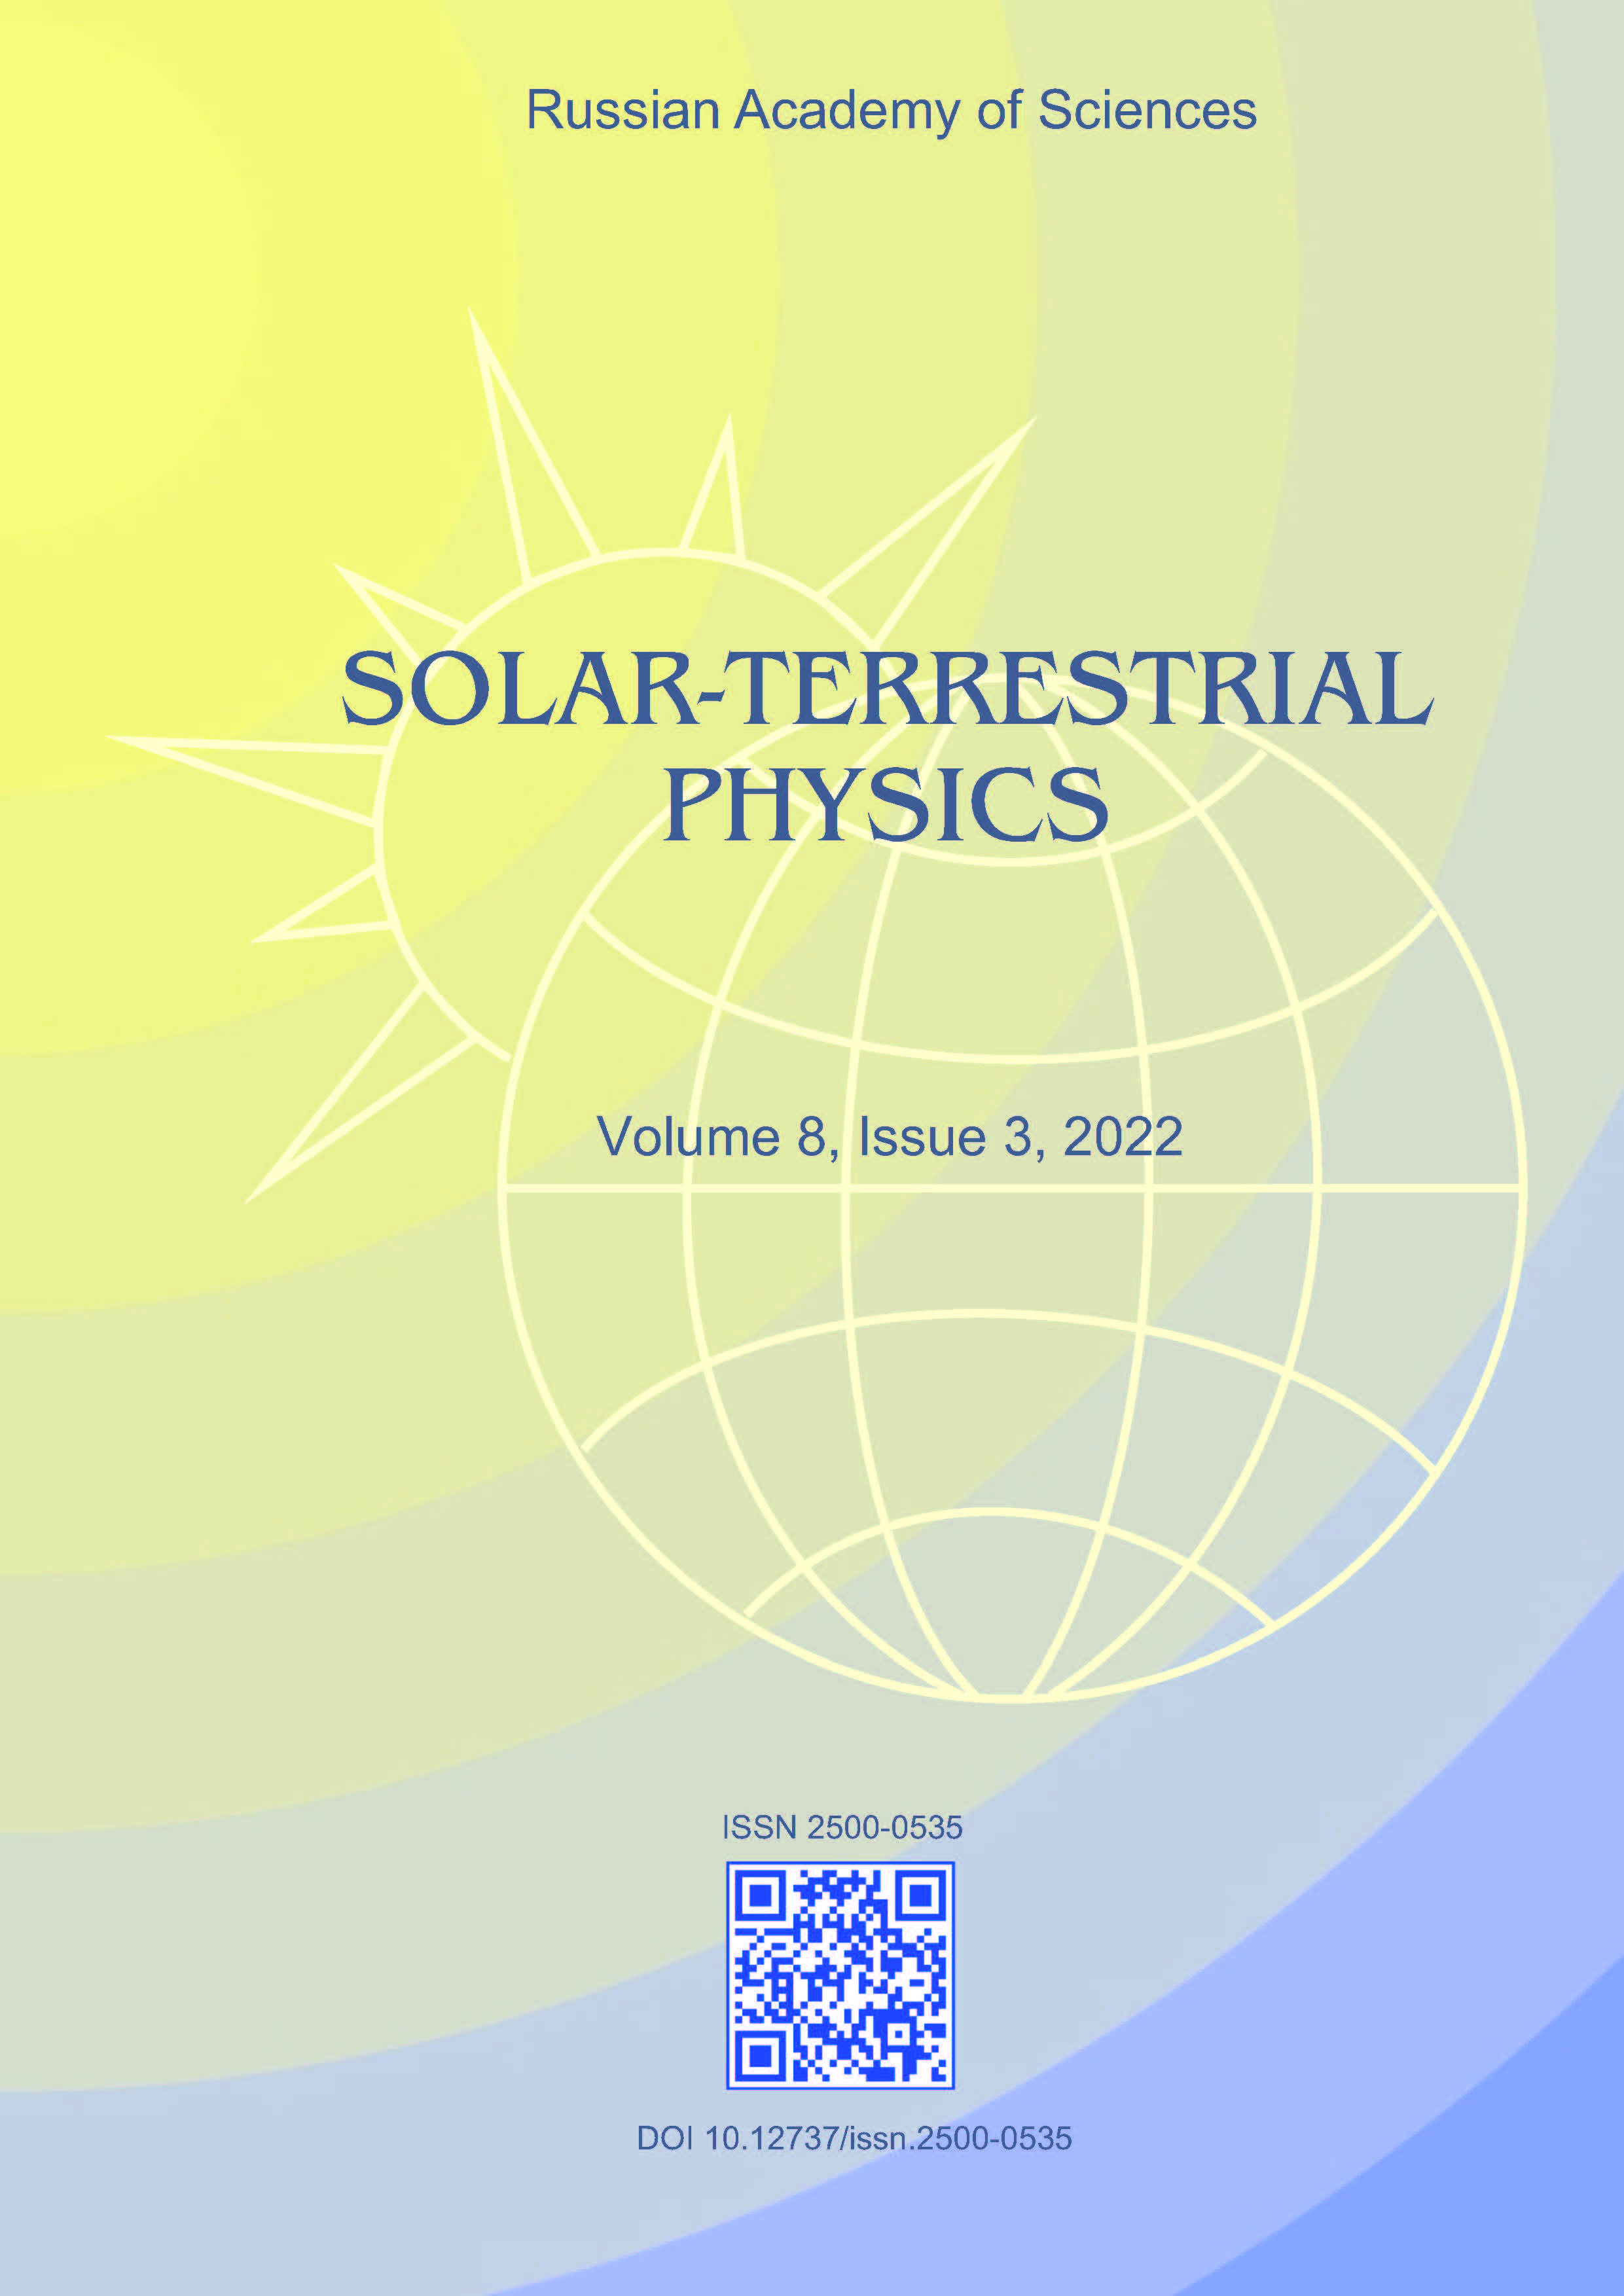                         Conditions for arrival of solar energetic protons in Earth after strong solar flares
            